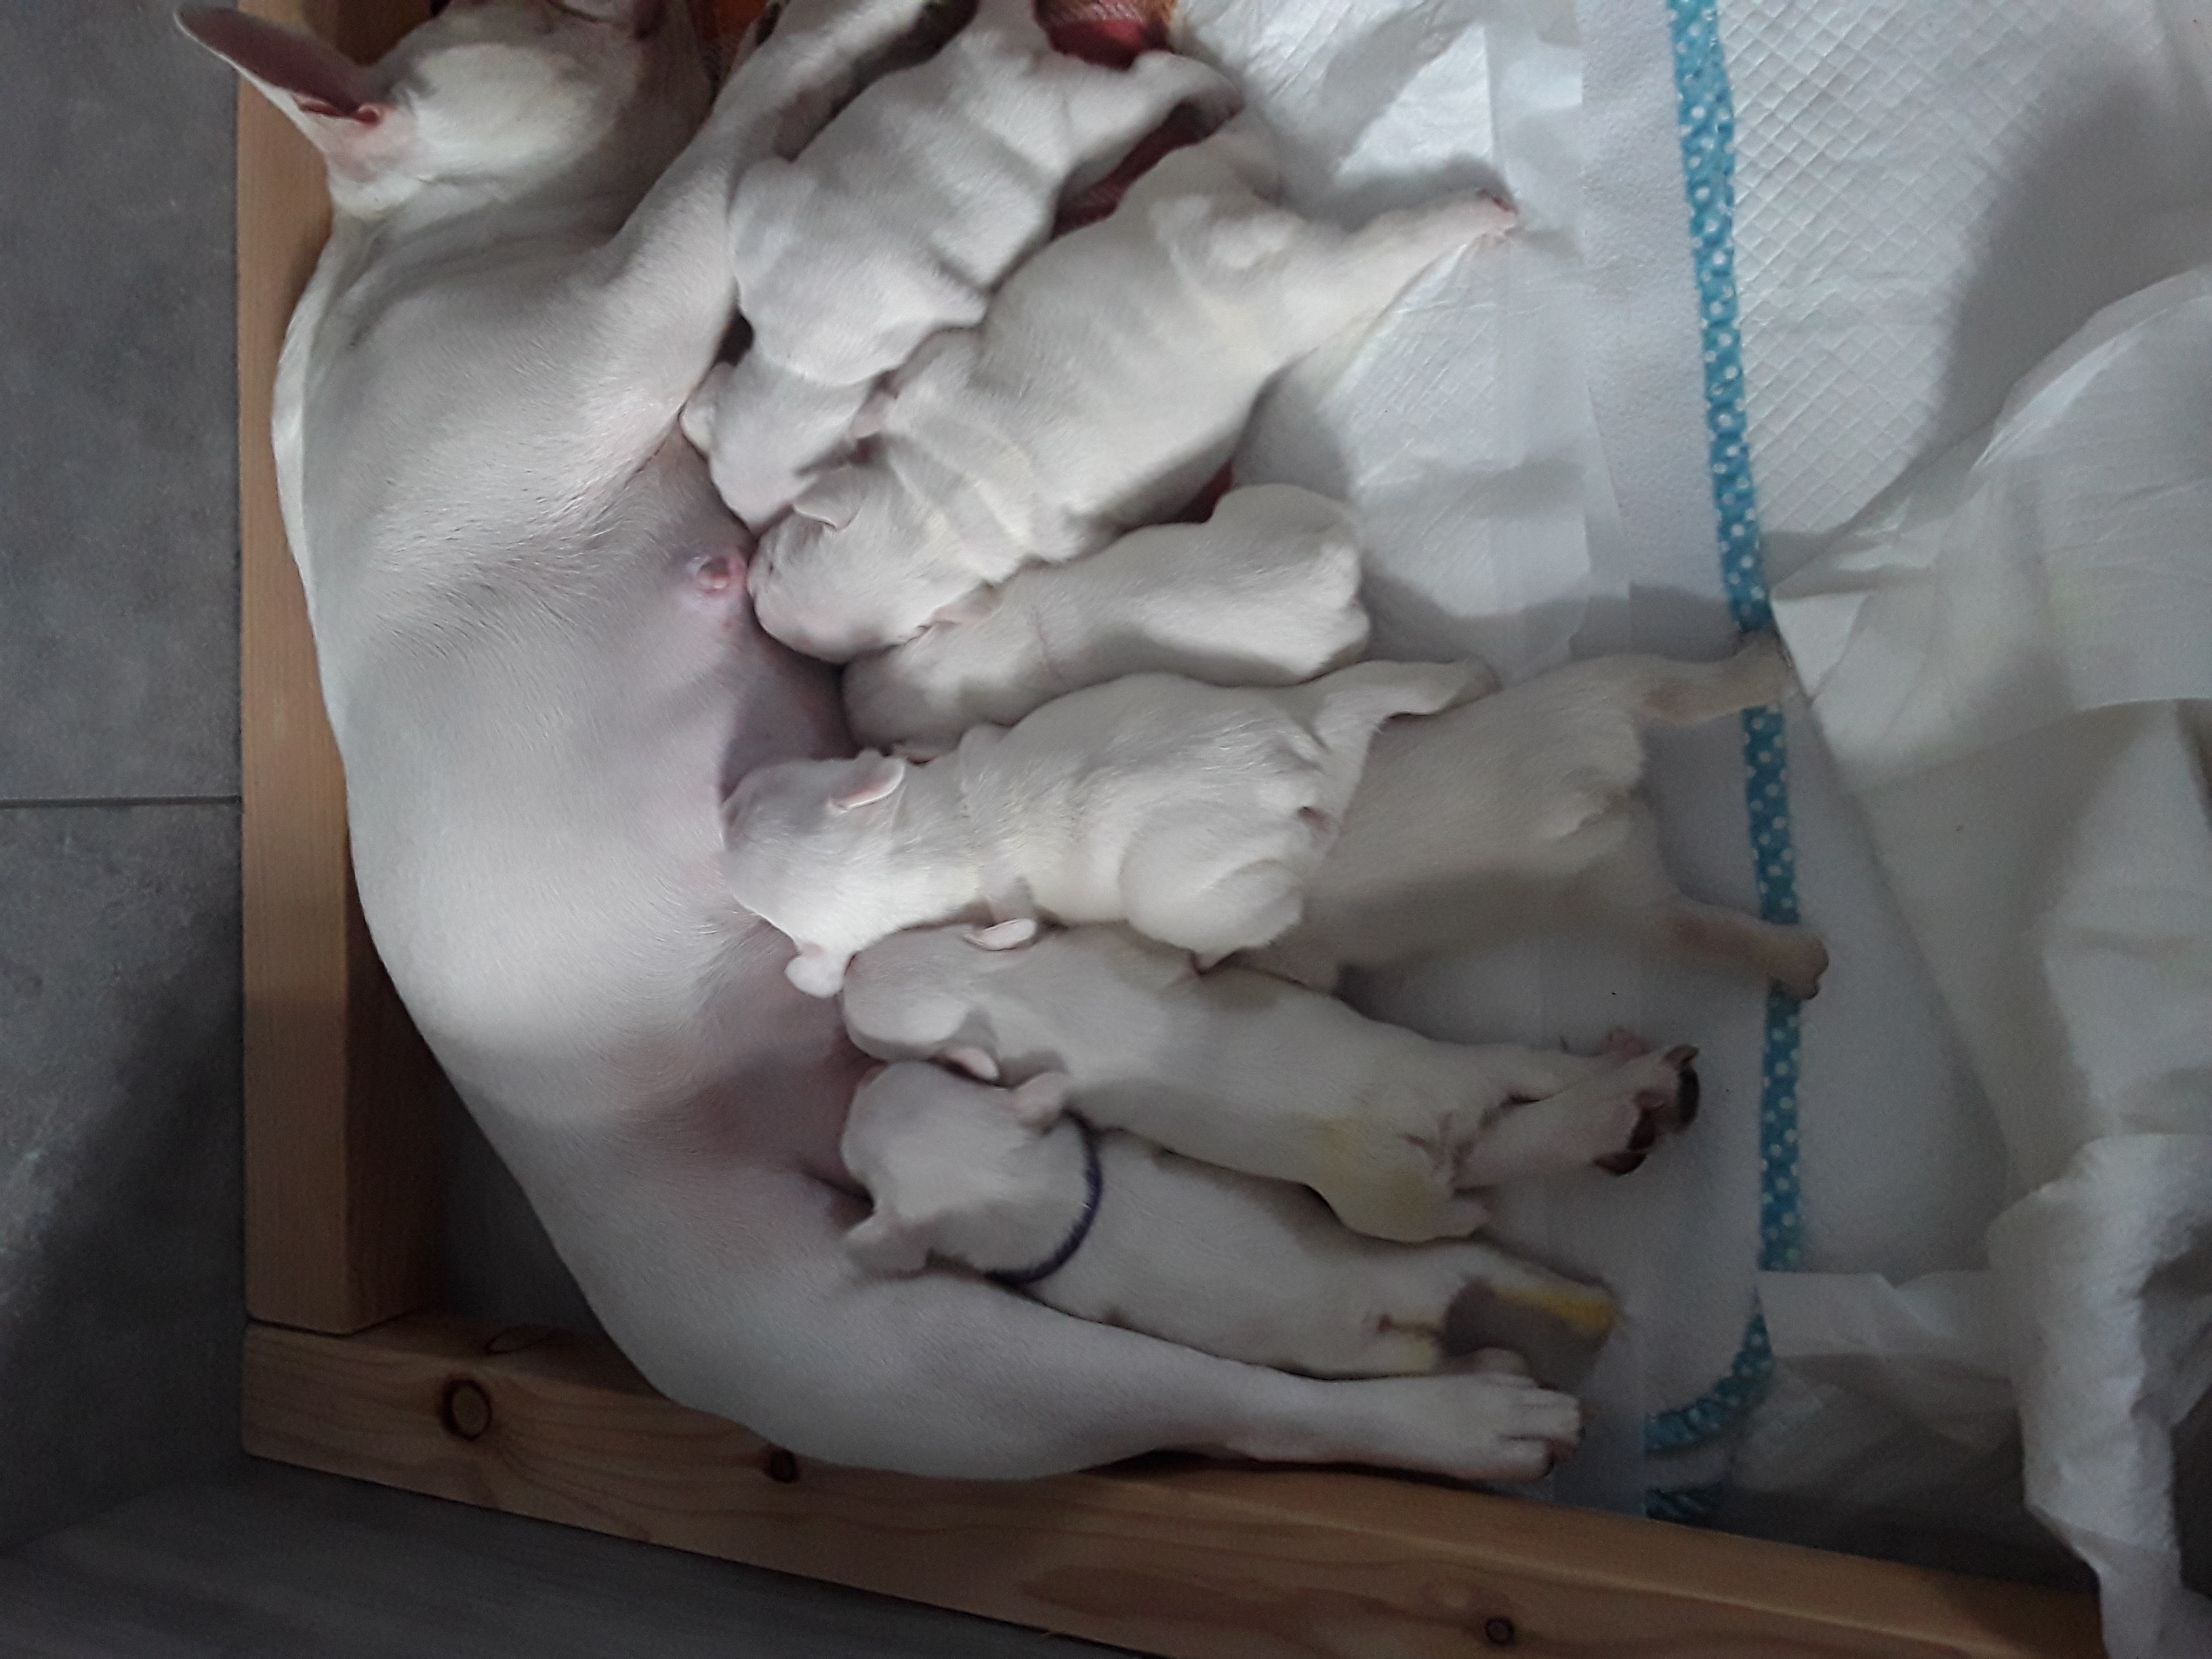 Mum with all 8 puppies